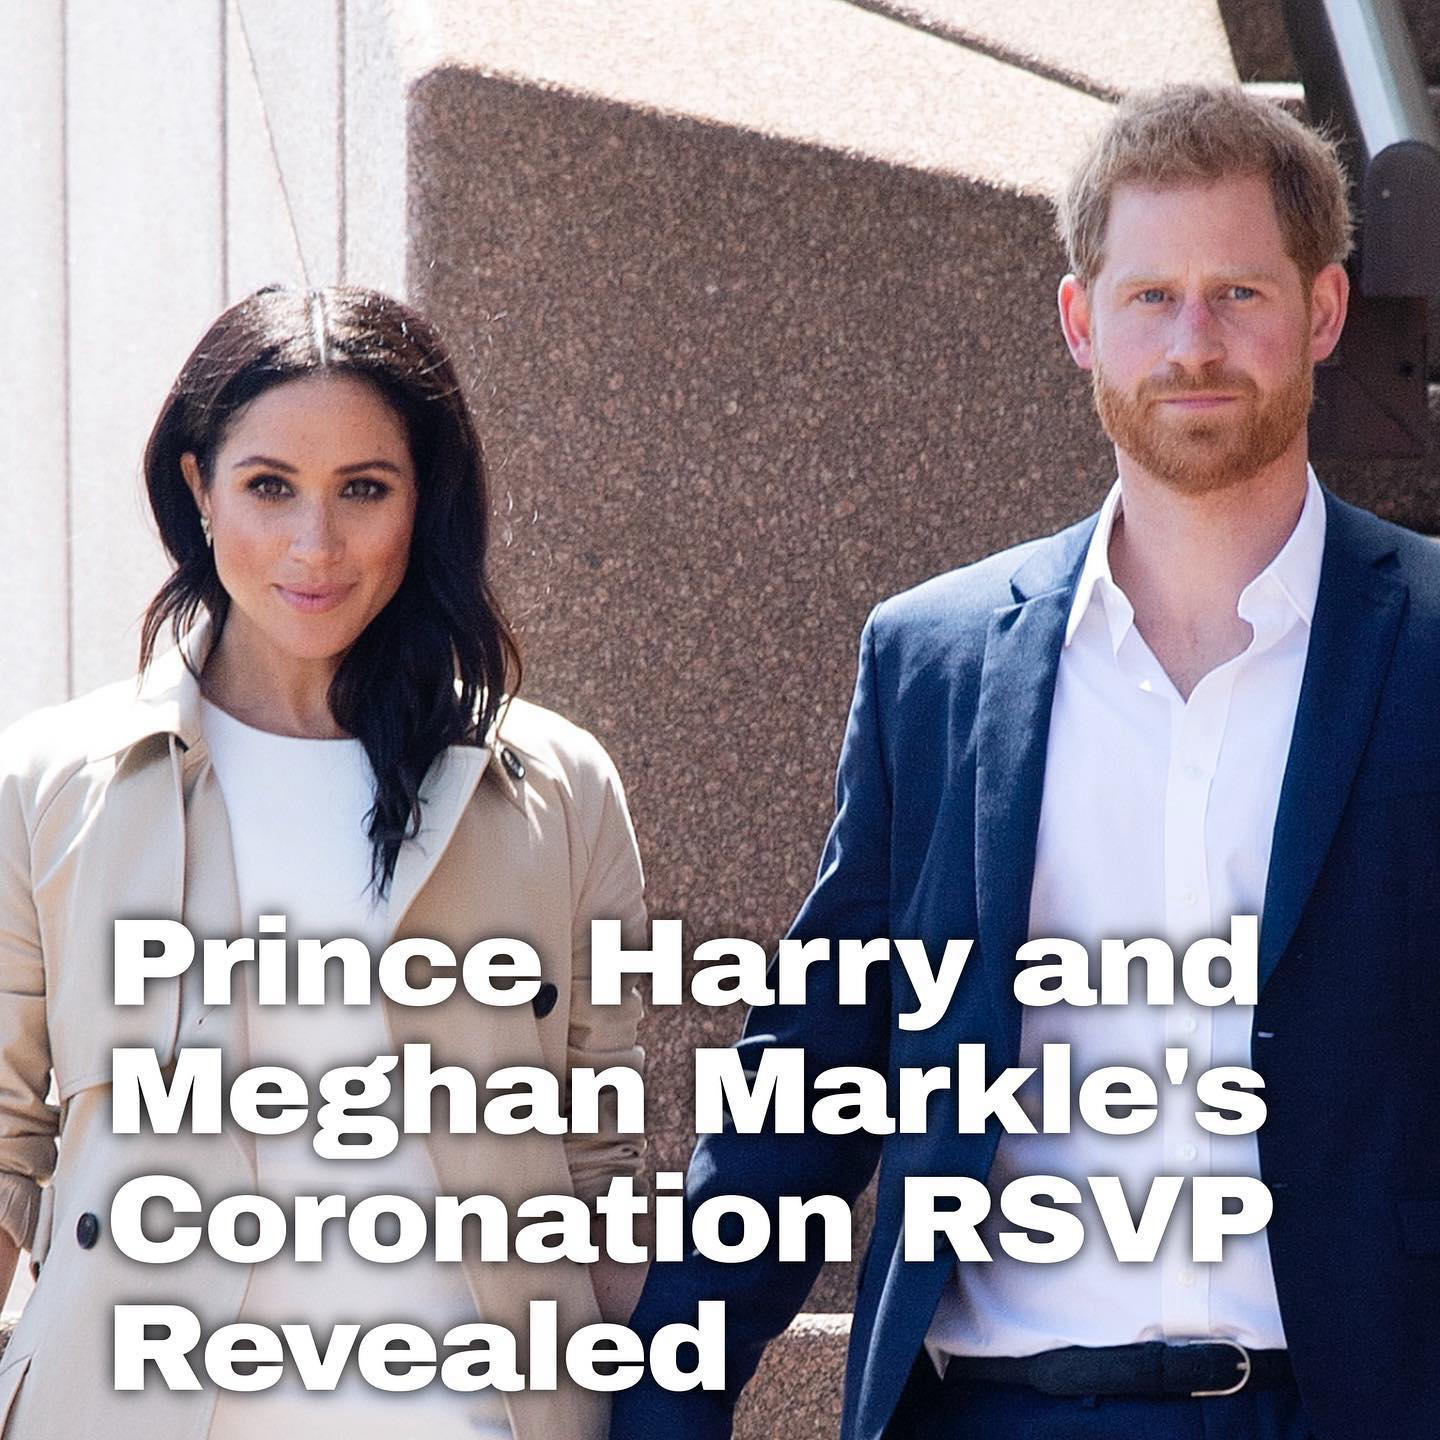 image  1 Prince Harry and Meghan Markle's Coronation RSVP has finally been revealed